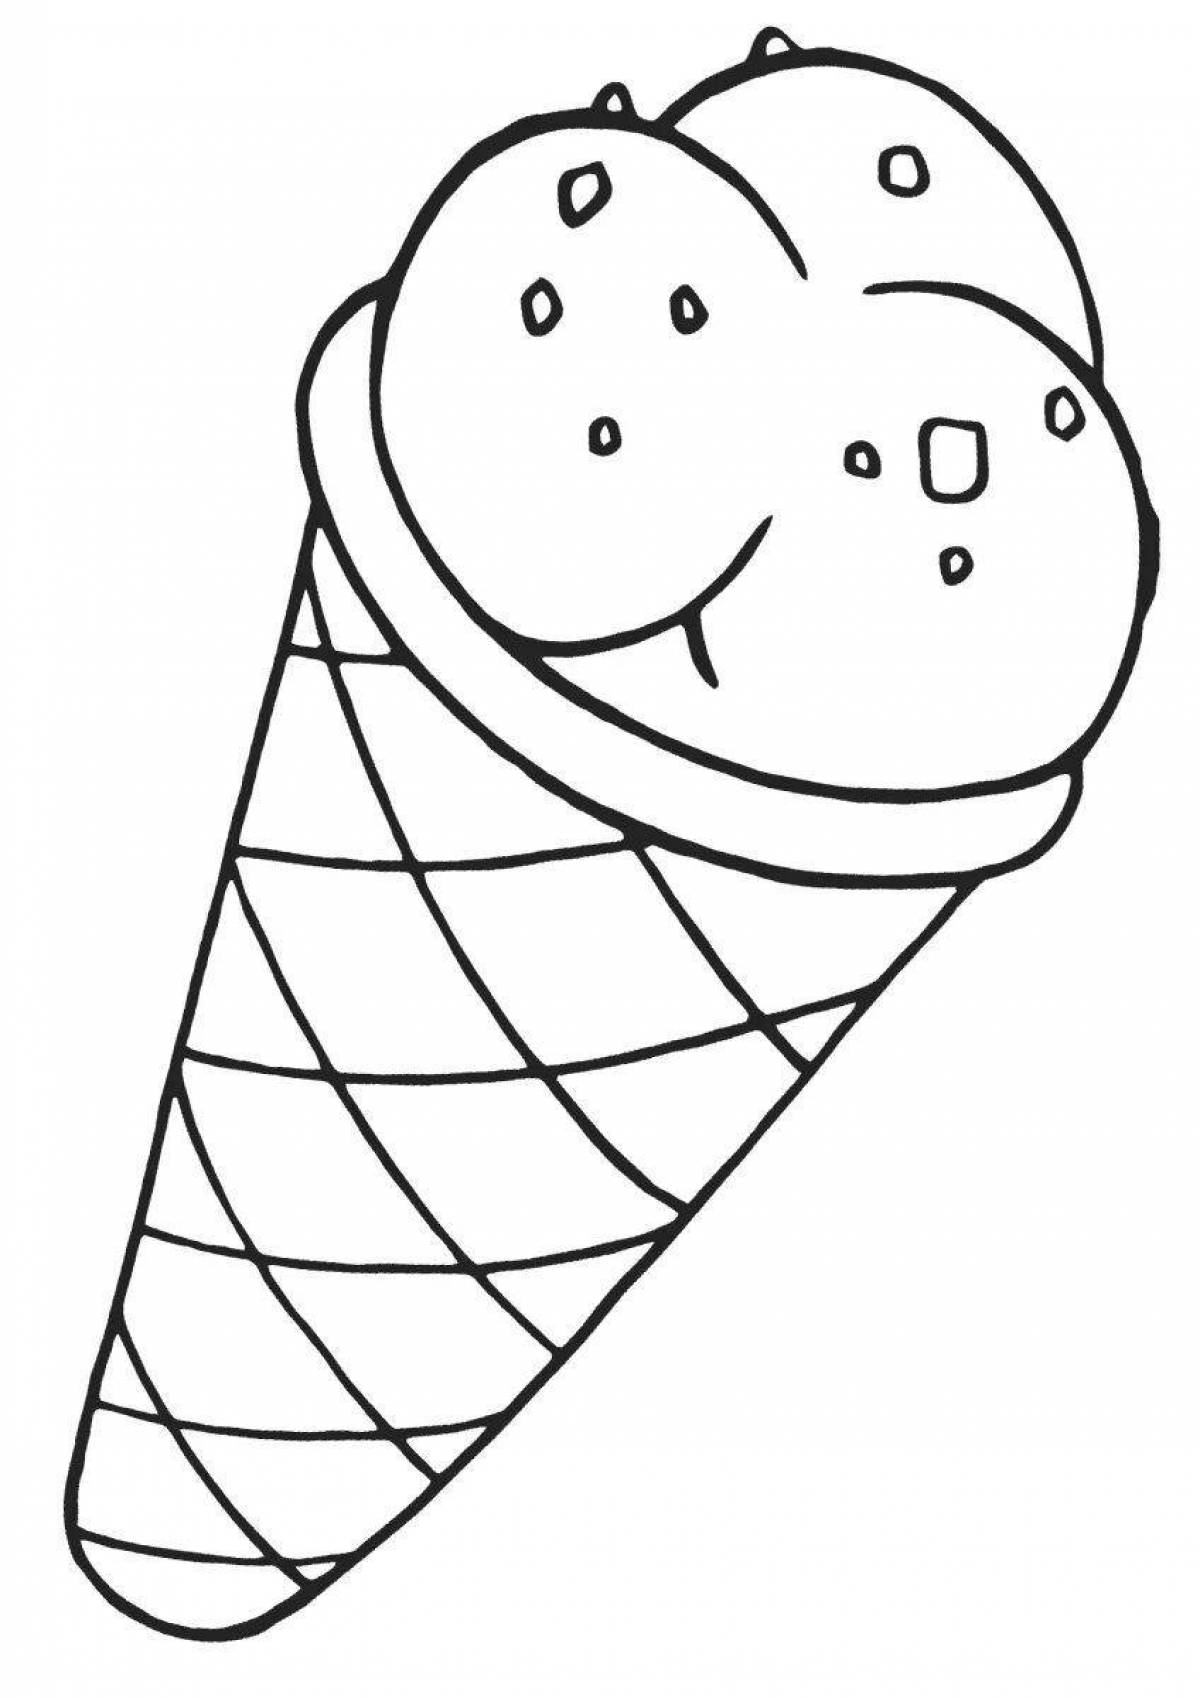 Colorful vibrant popsicle coloring page